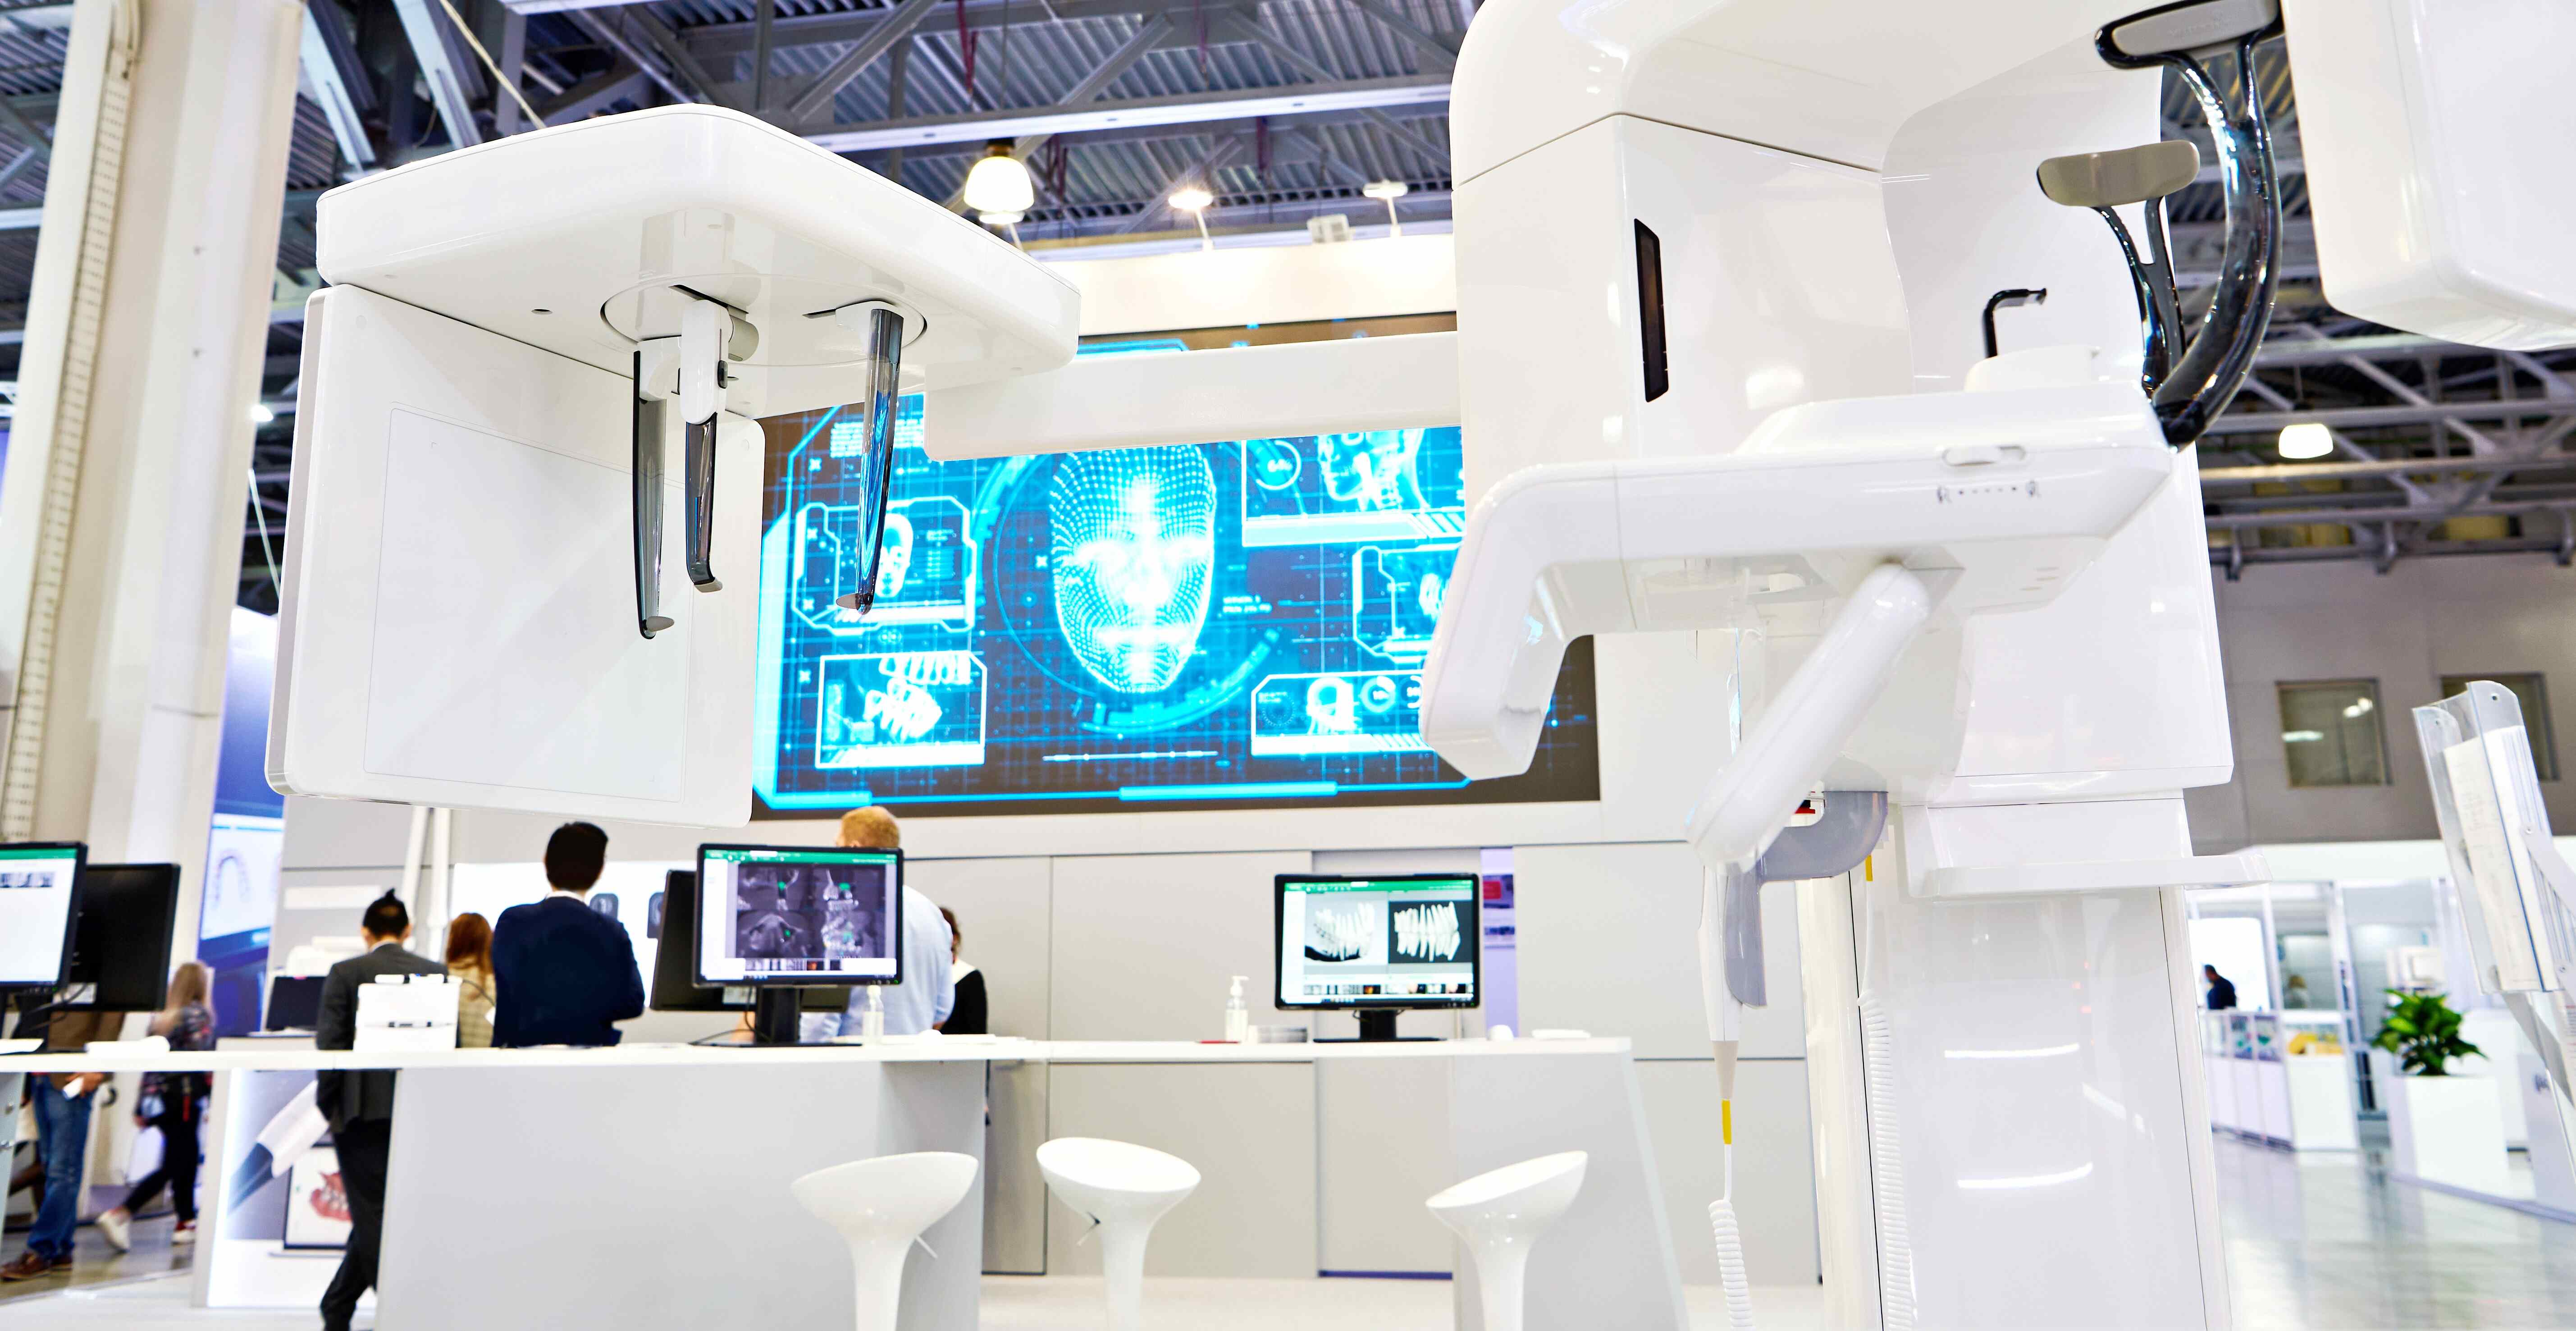 Innovations and future tech spotted at this year's MEDICA event